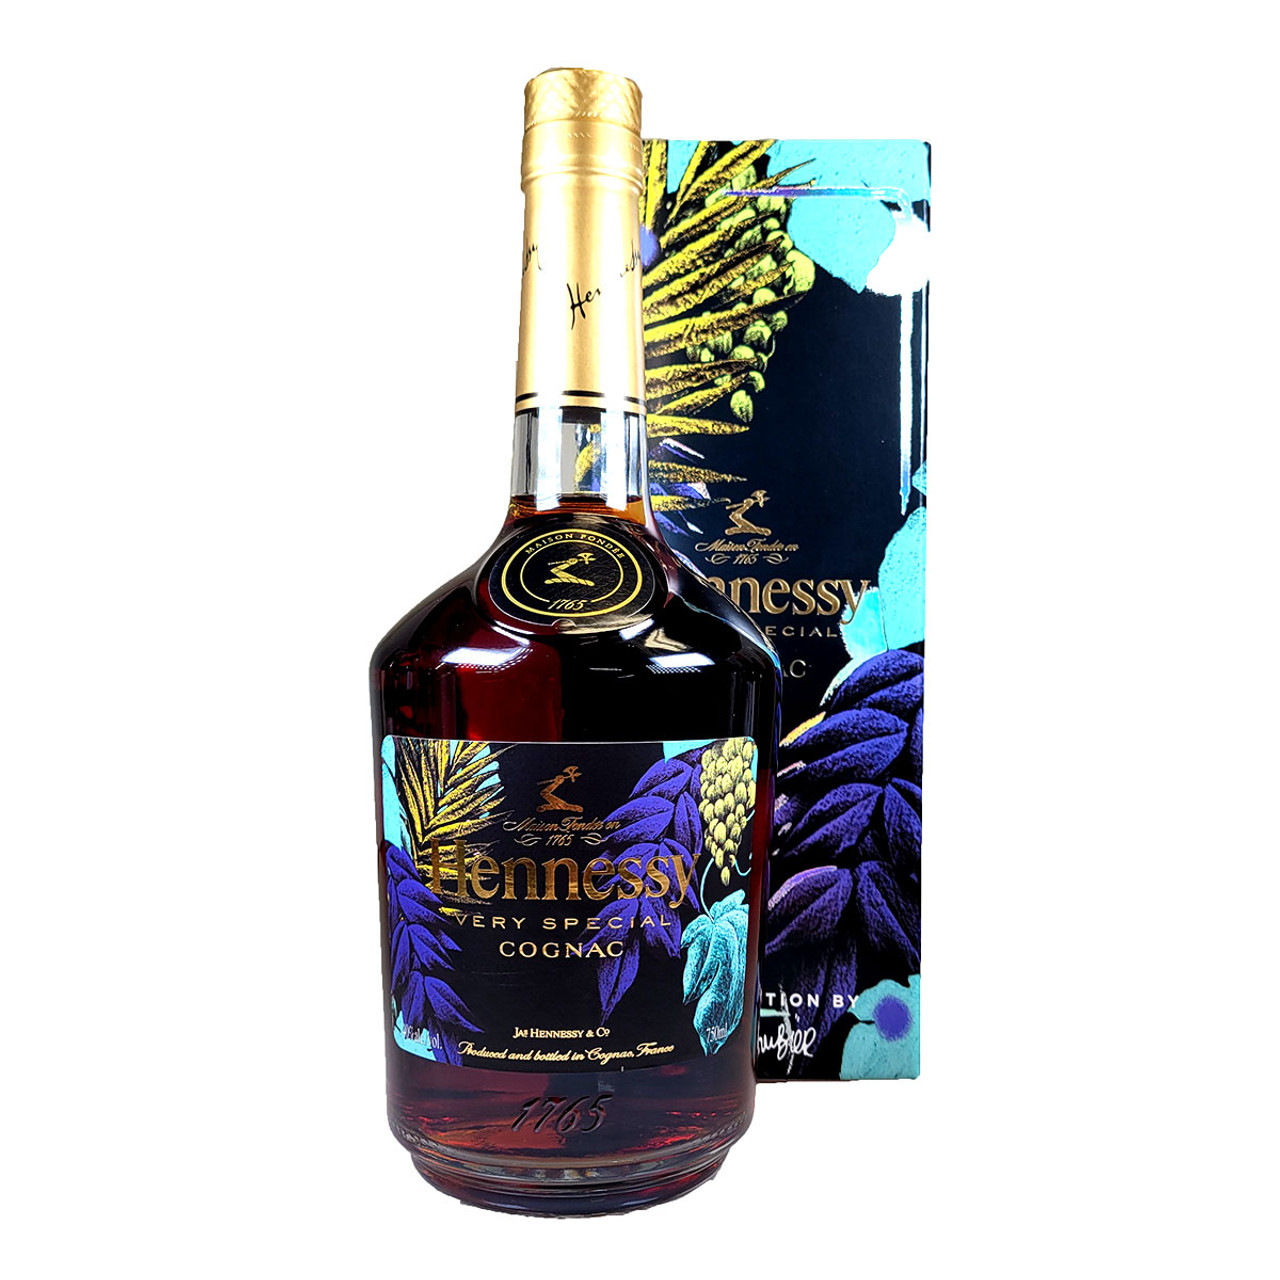 Hennessy VS Cognac Limited Edition by Julien Colombier (750ml)